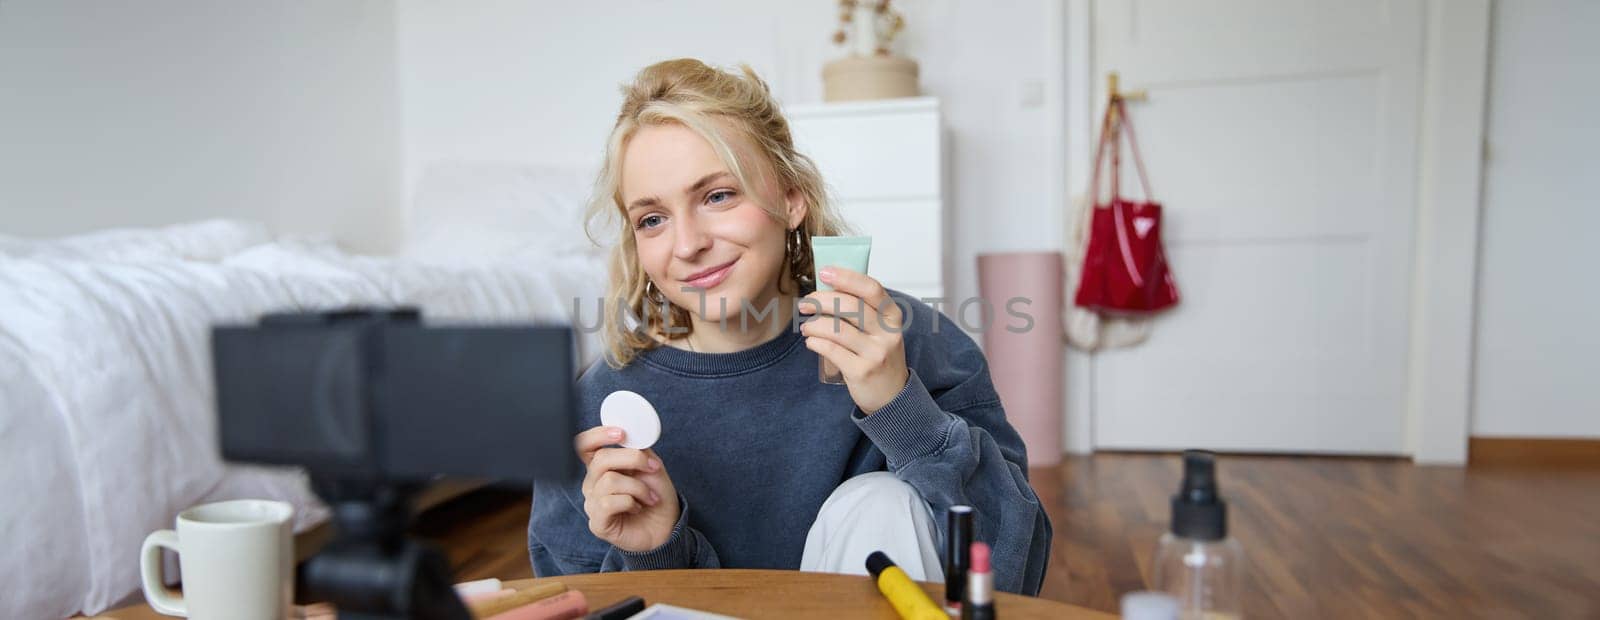 Portrait of young woman promoting beauty product, applies makeup in front of camera, recording video for her vlog, creating content for social media, sitting in a room on floor.